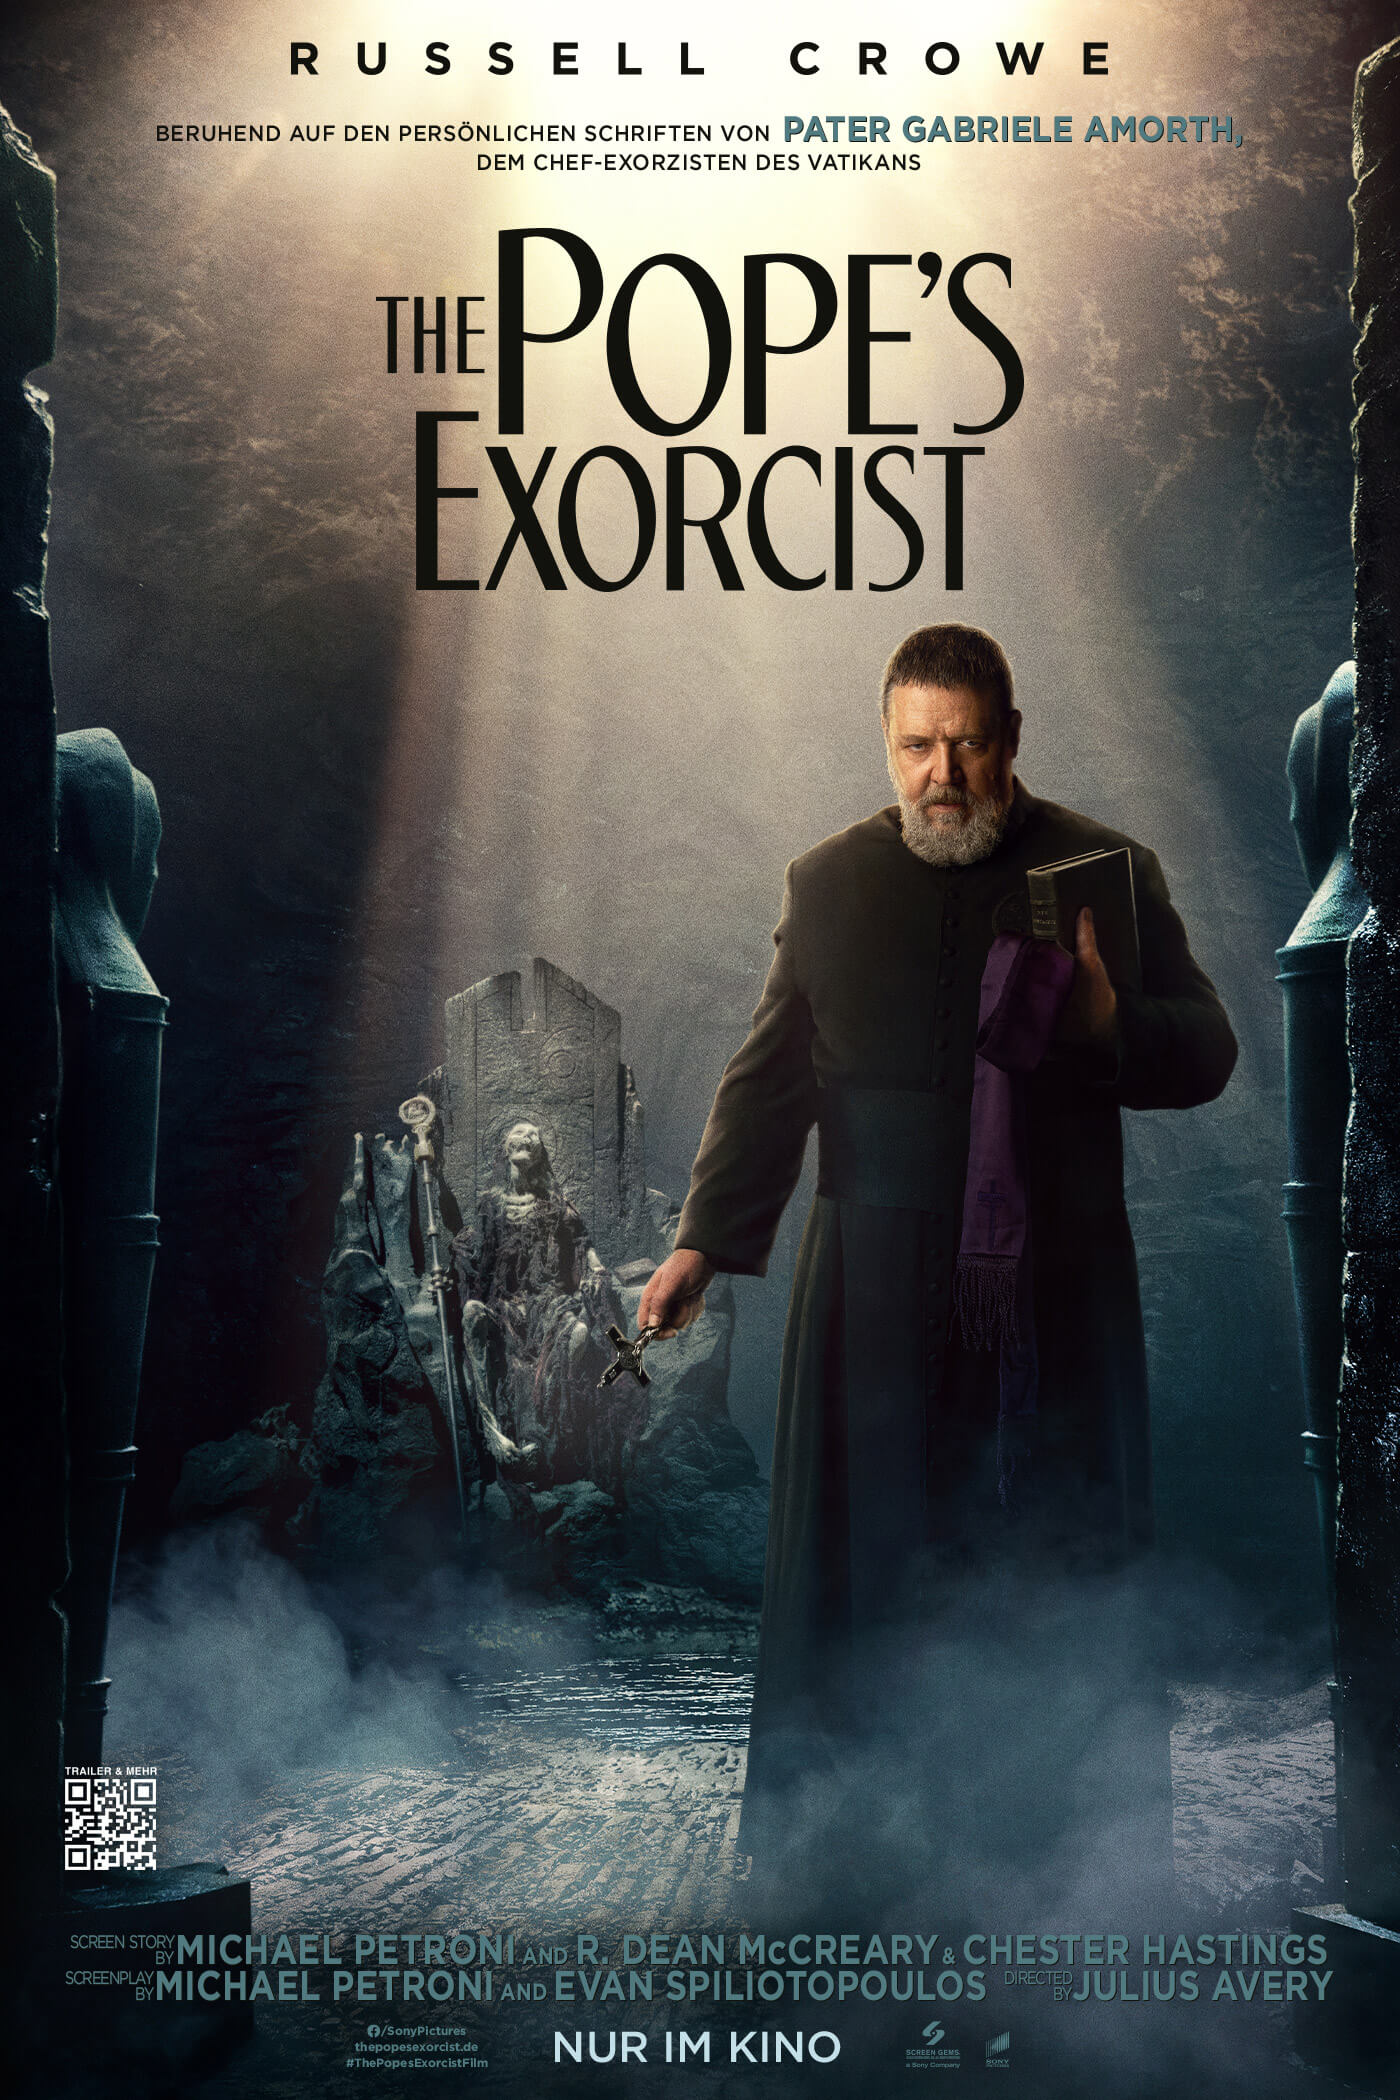 The Pope's Exorcist review